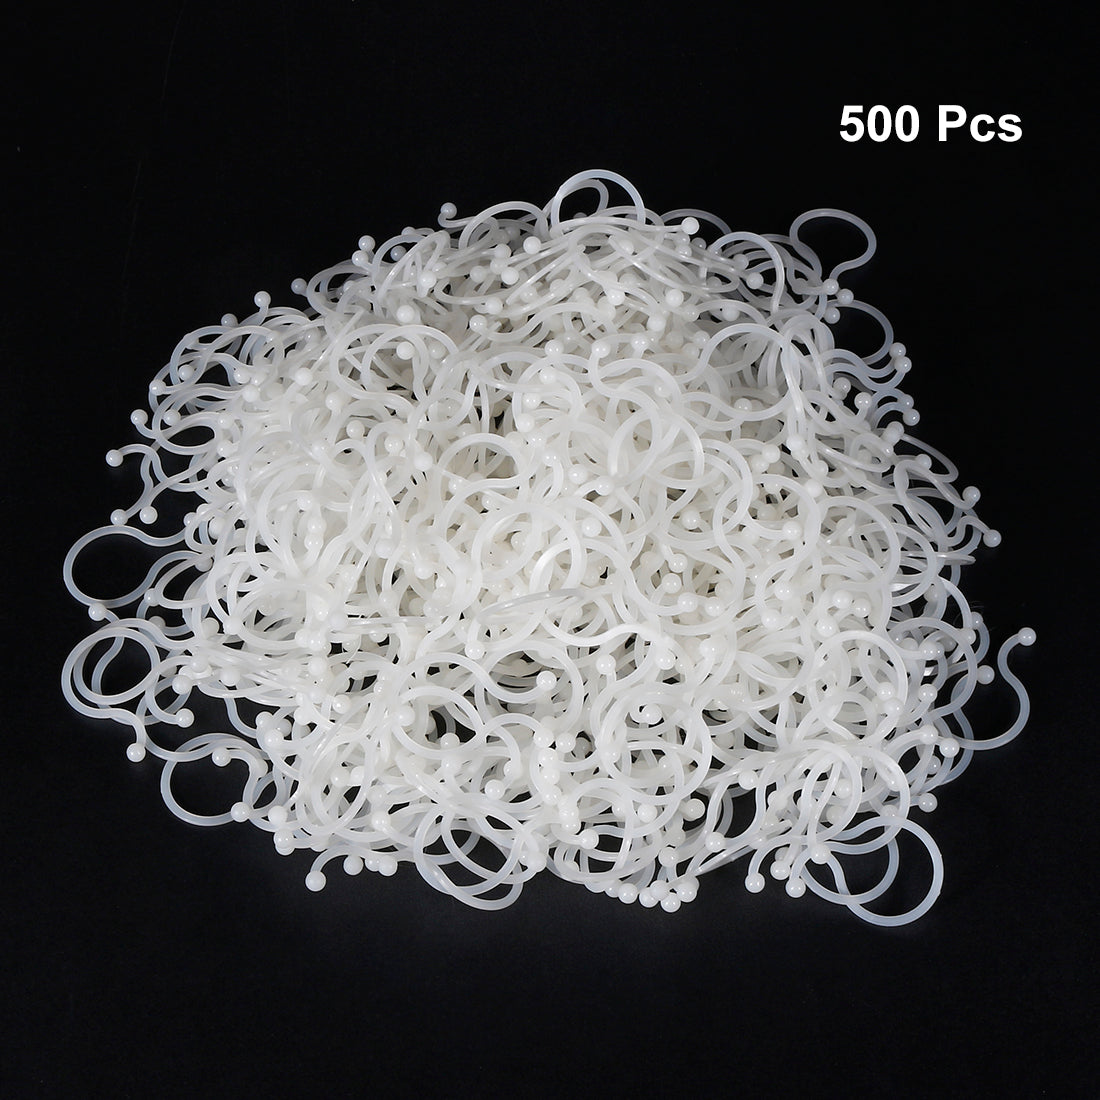 uxcell Uxcell 500pcs Twist Lock Cable Wire Ties Nylon U Shape Save Place 24mm Dia White